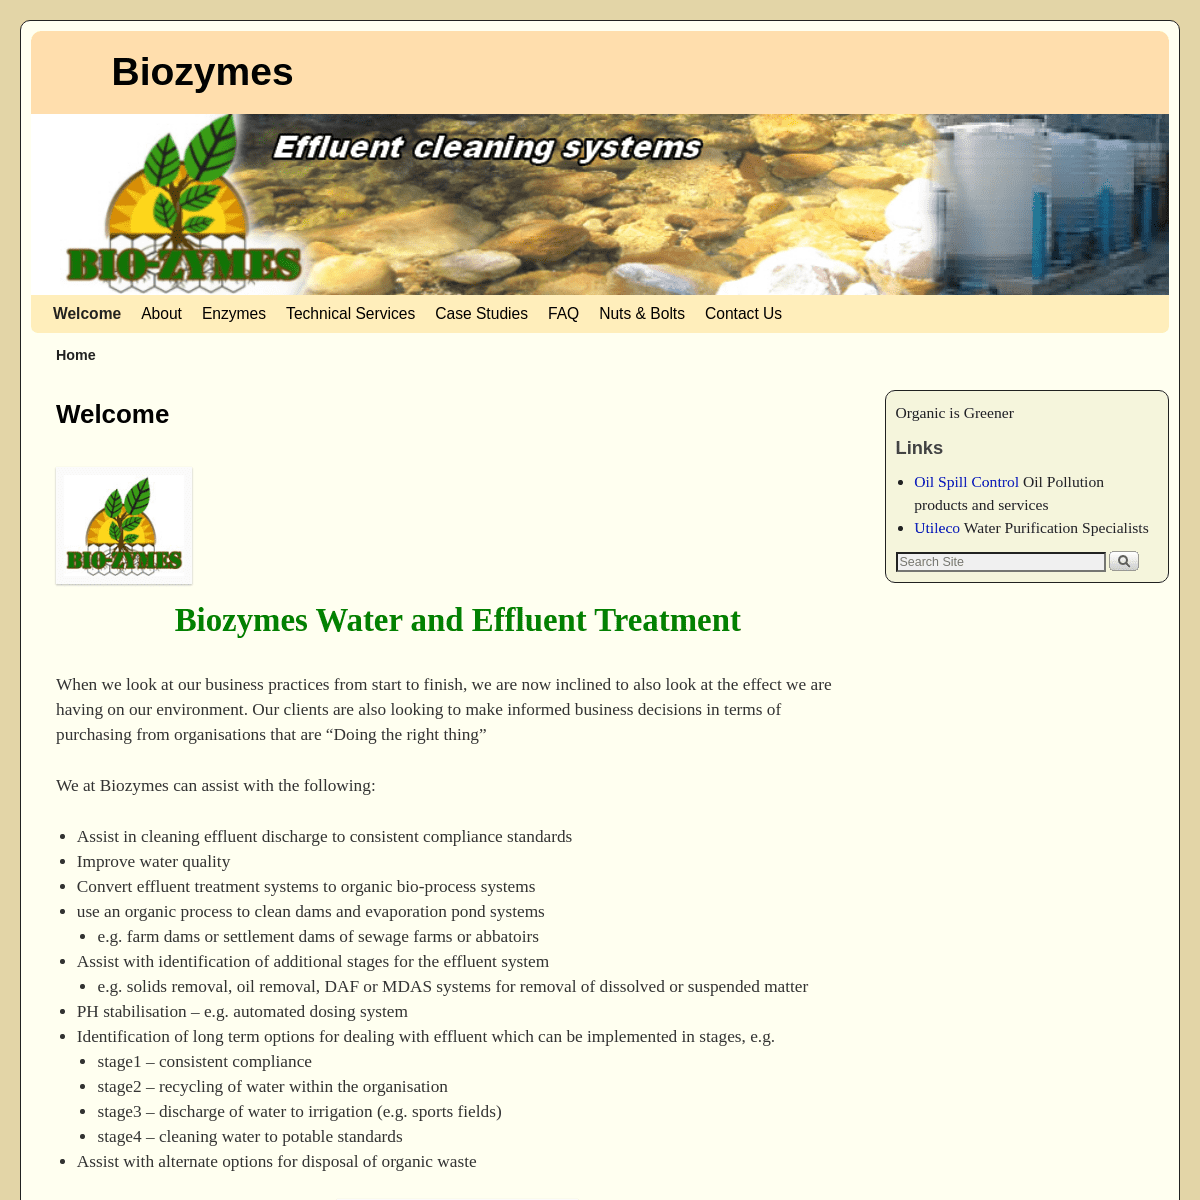 A complete backup of https://biozymes.co.za